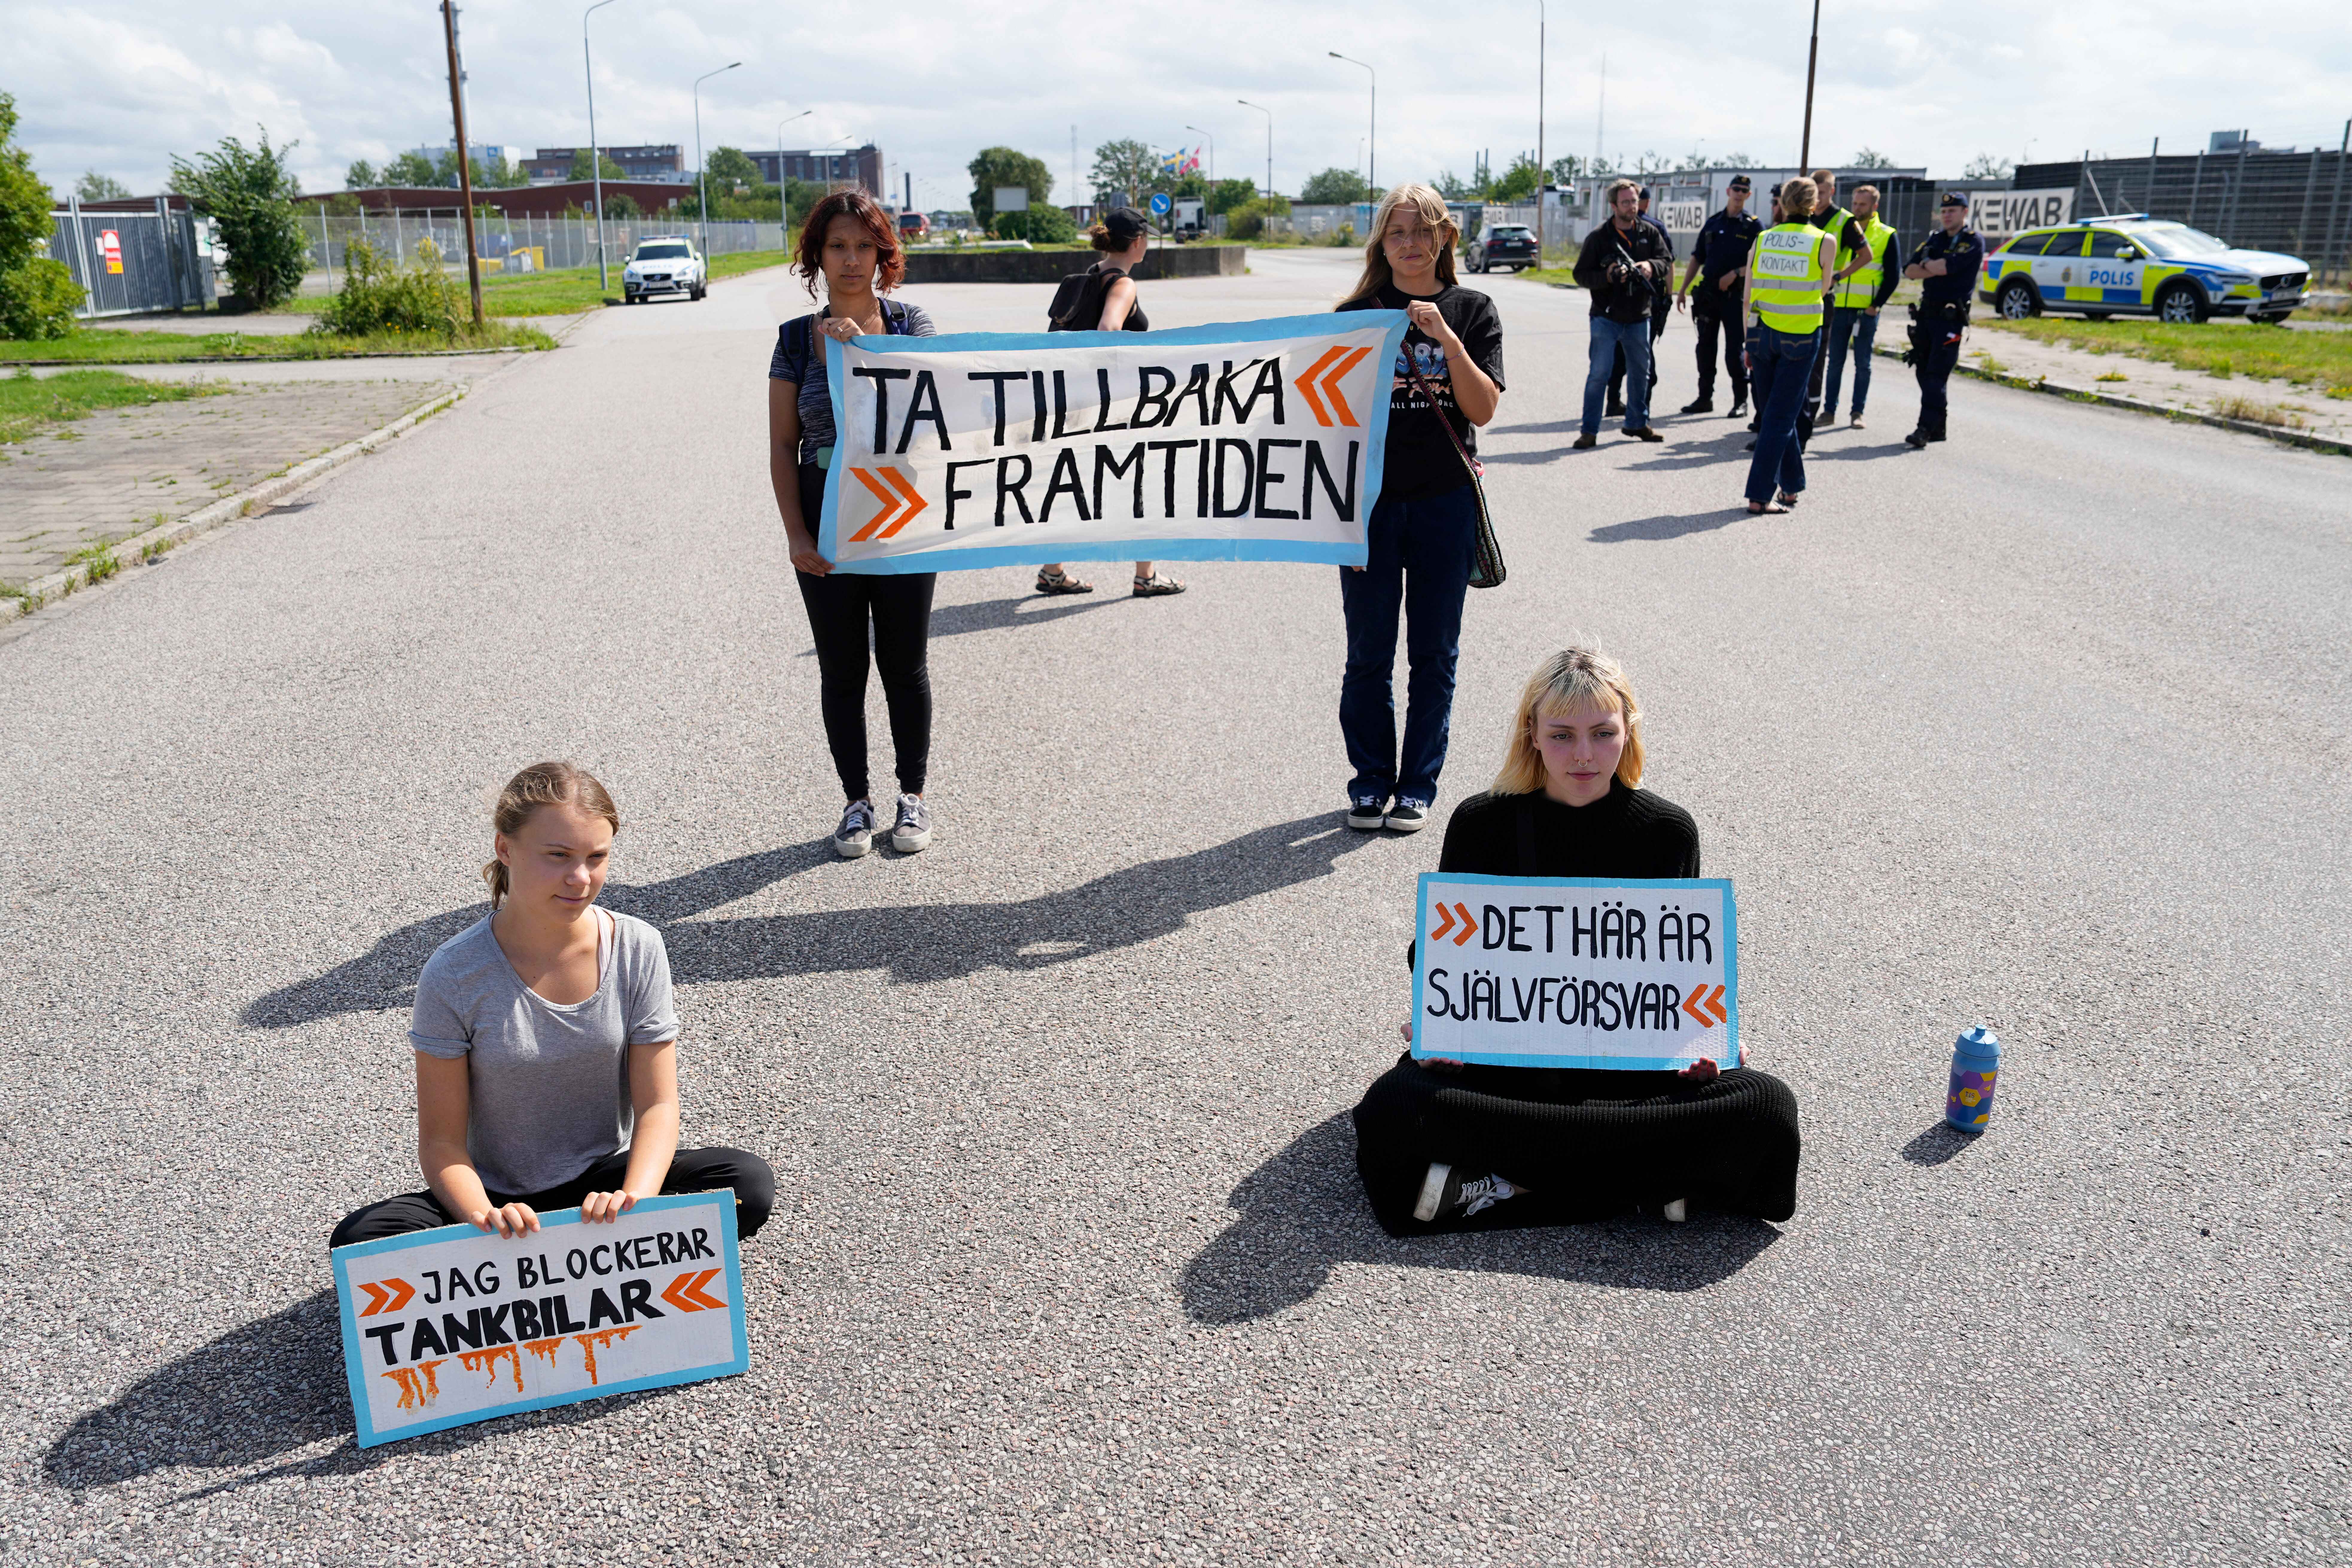 Swedish climate change activist Greta Thunberg has been charged a second time for disobeying a police order to leave a protest at a busy port in Sweden. AP Photo/Pavel Golovkin